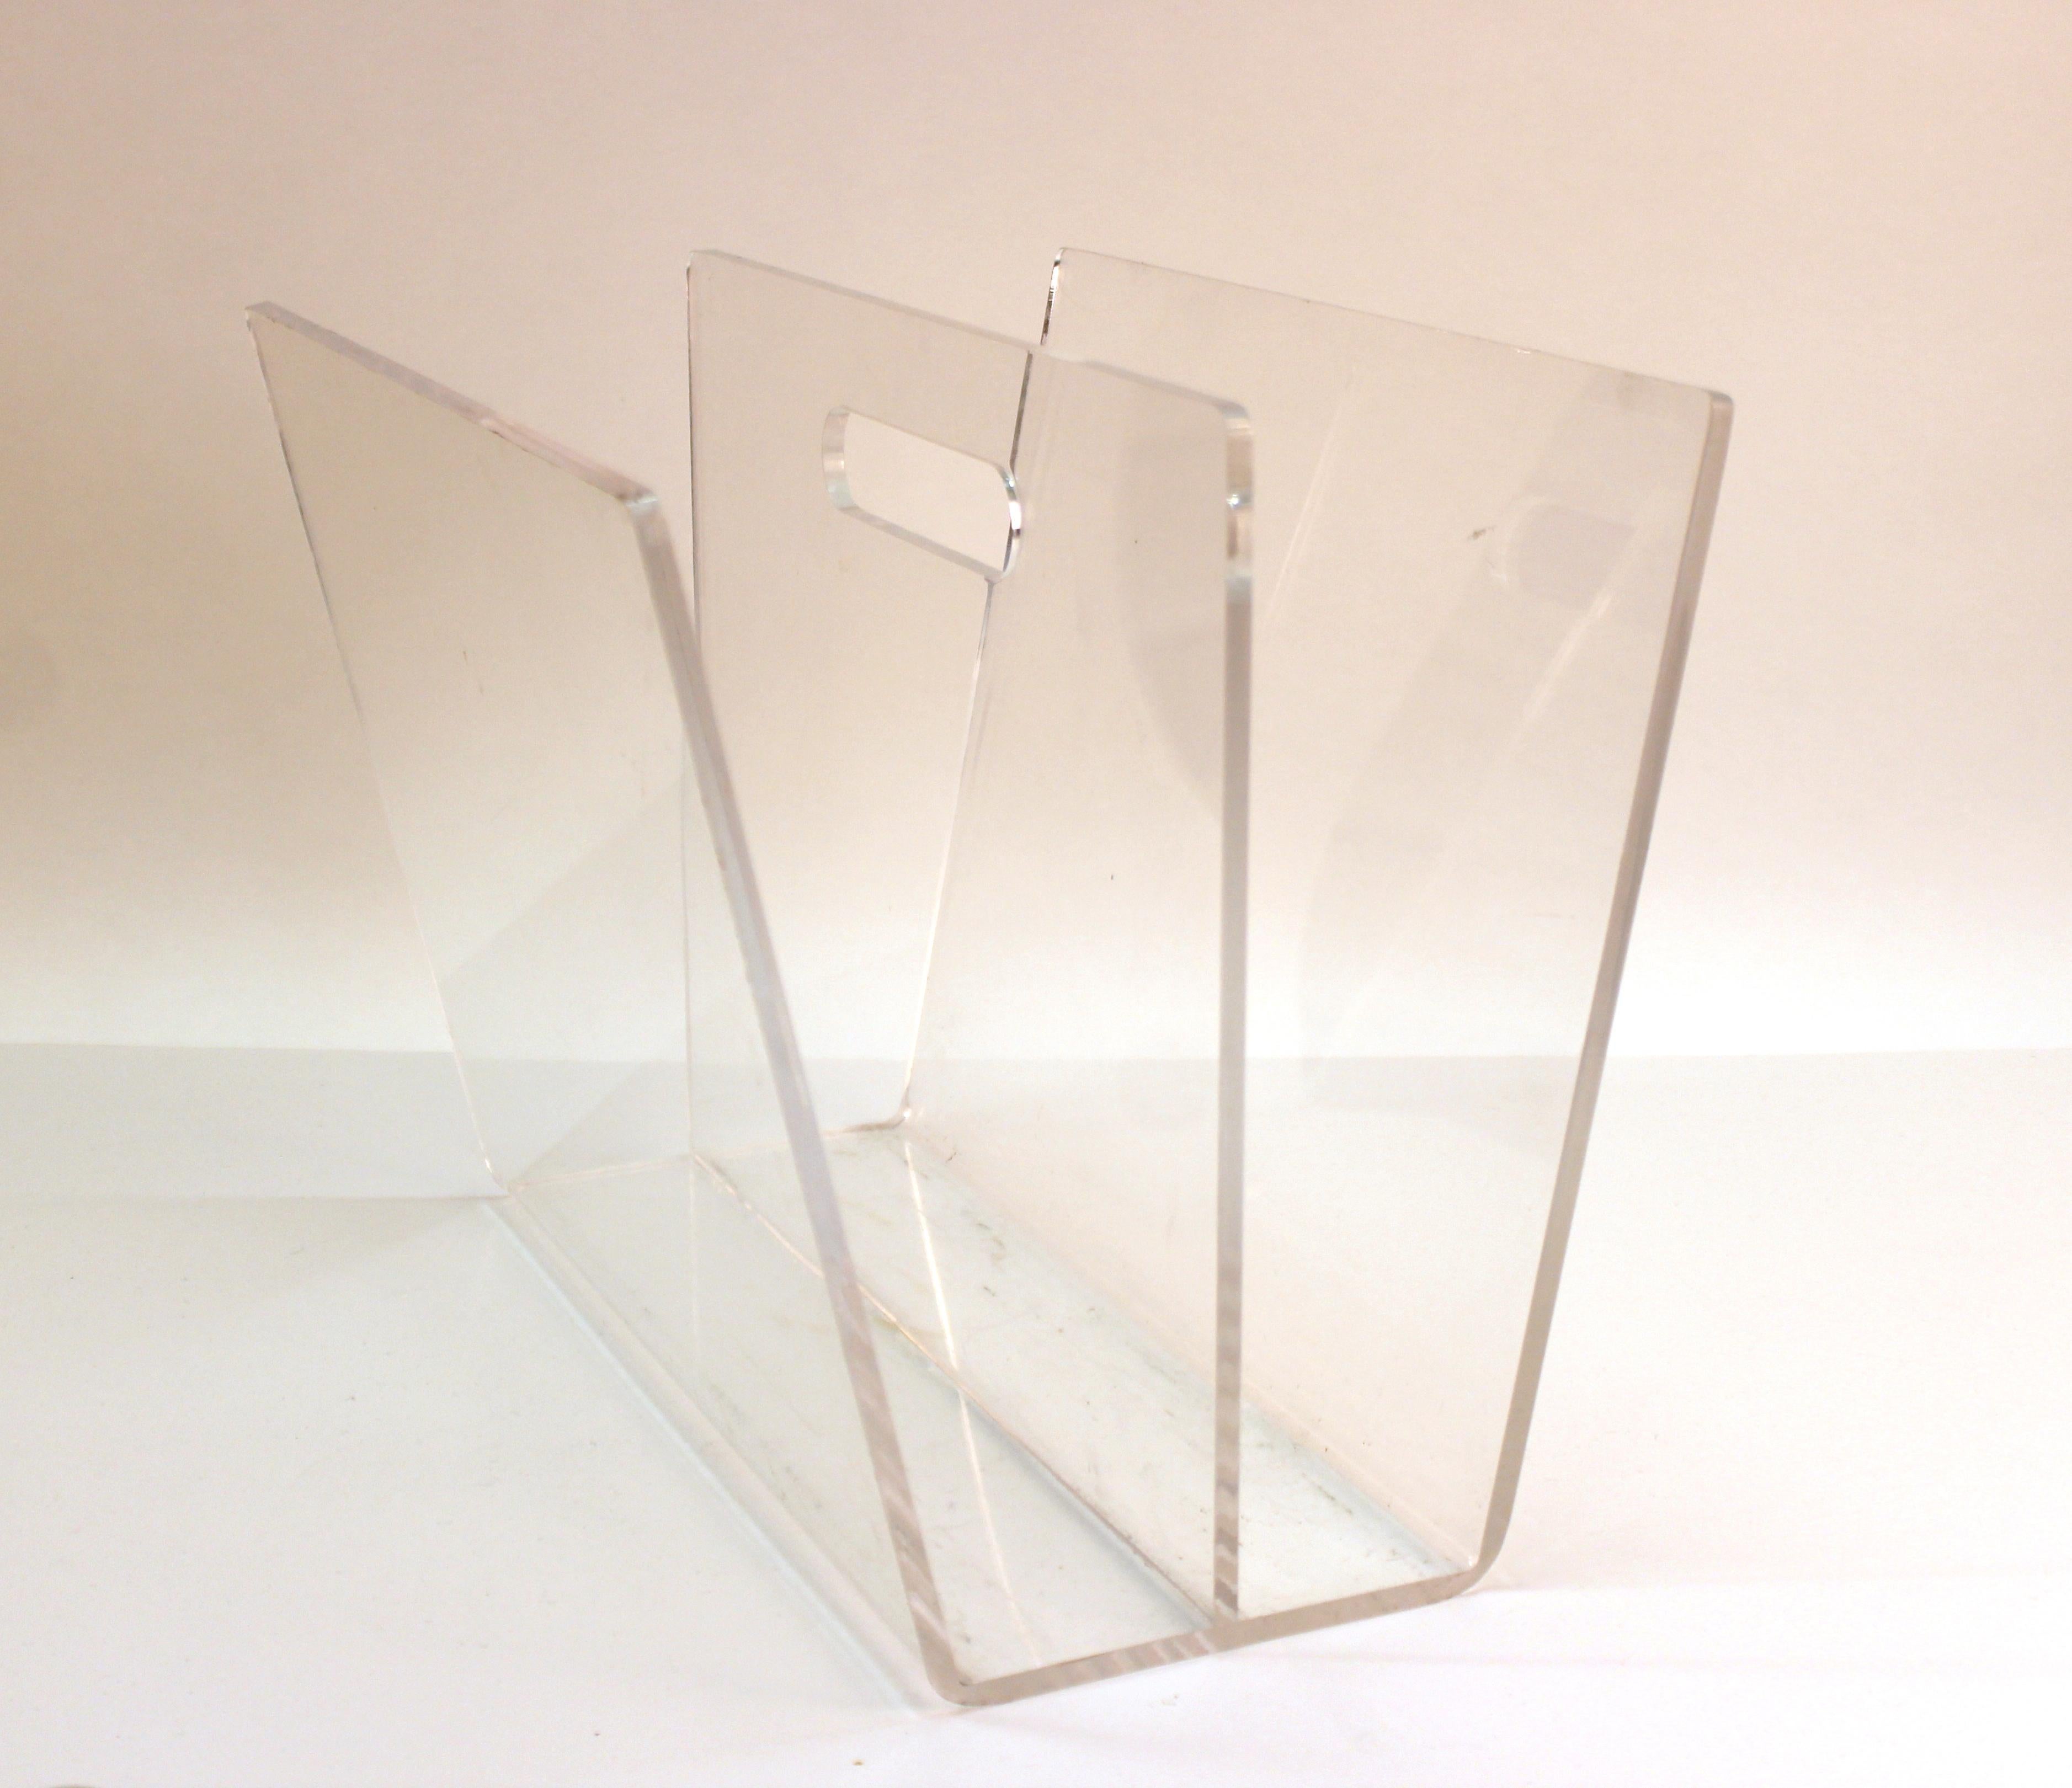 Mid-Century Modern magazine rack in clear Lucite. The piece dates from the 1970s and is in great vintage condition with some age-appropriate wear and minor scratches to the surfaces.